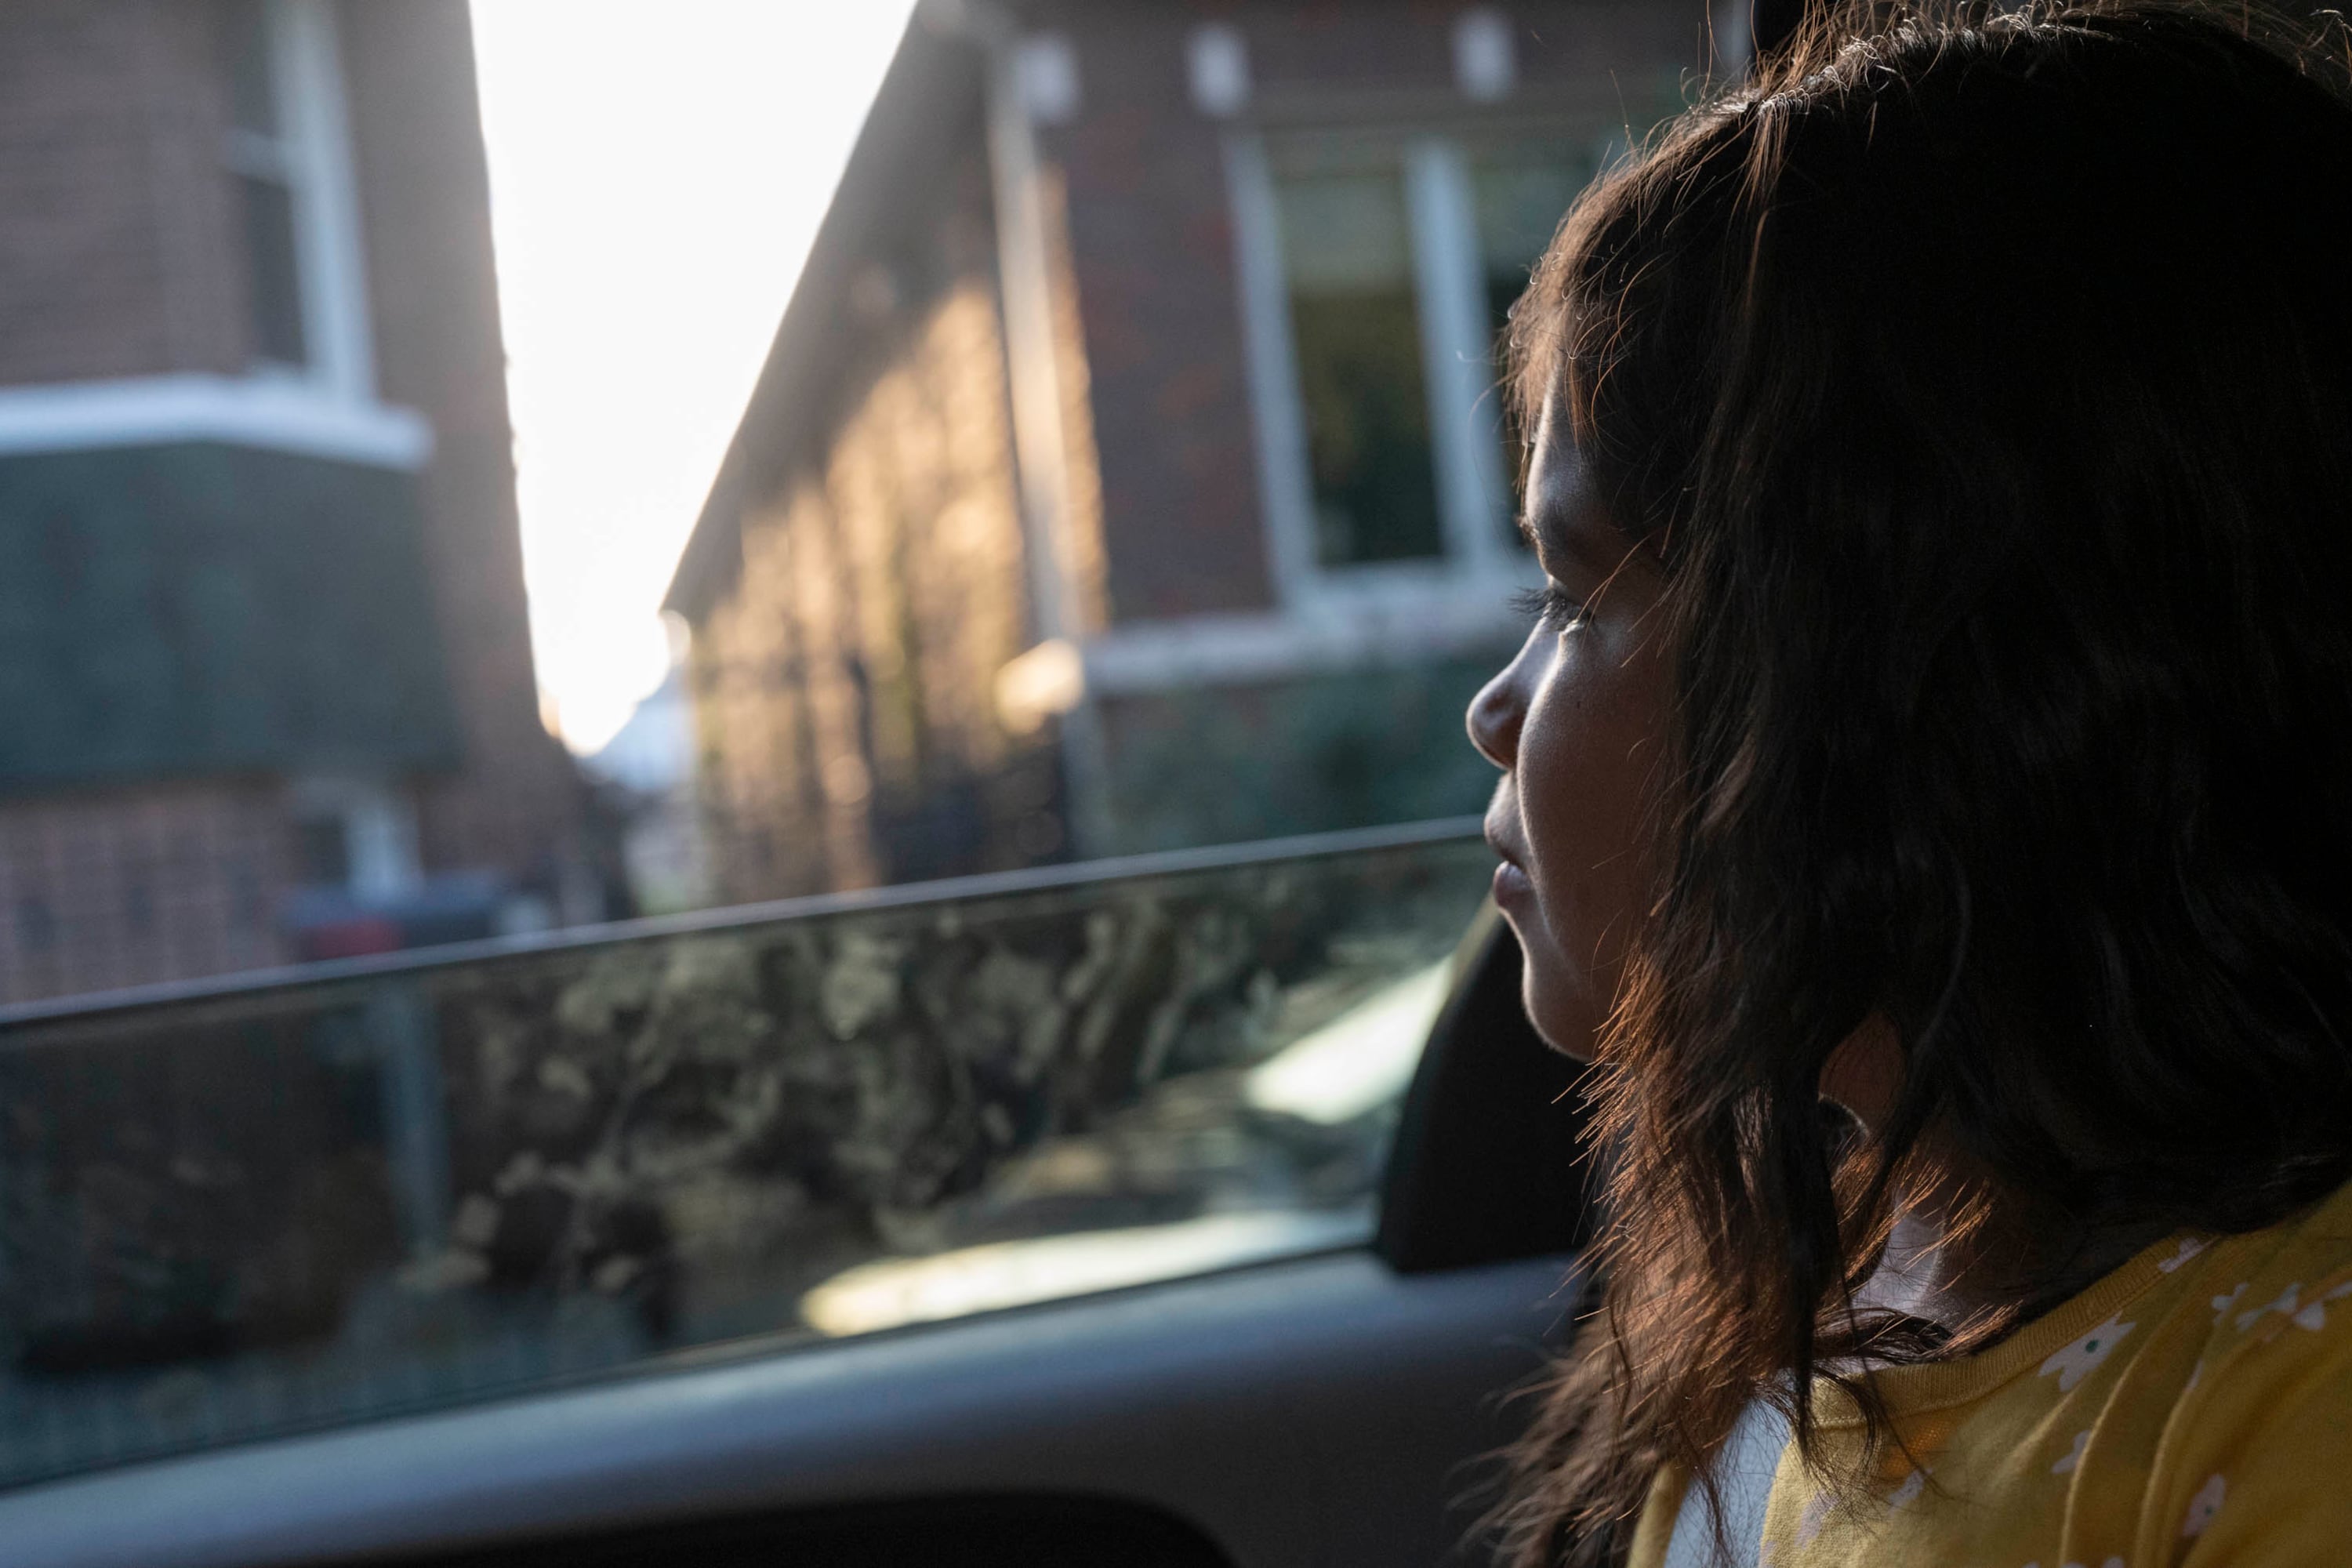 A young girl looks out the window of a car as early morning light outlines her face.